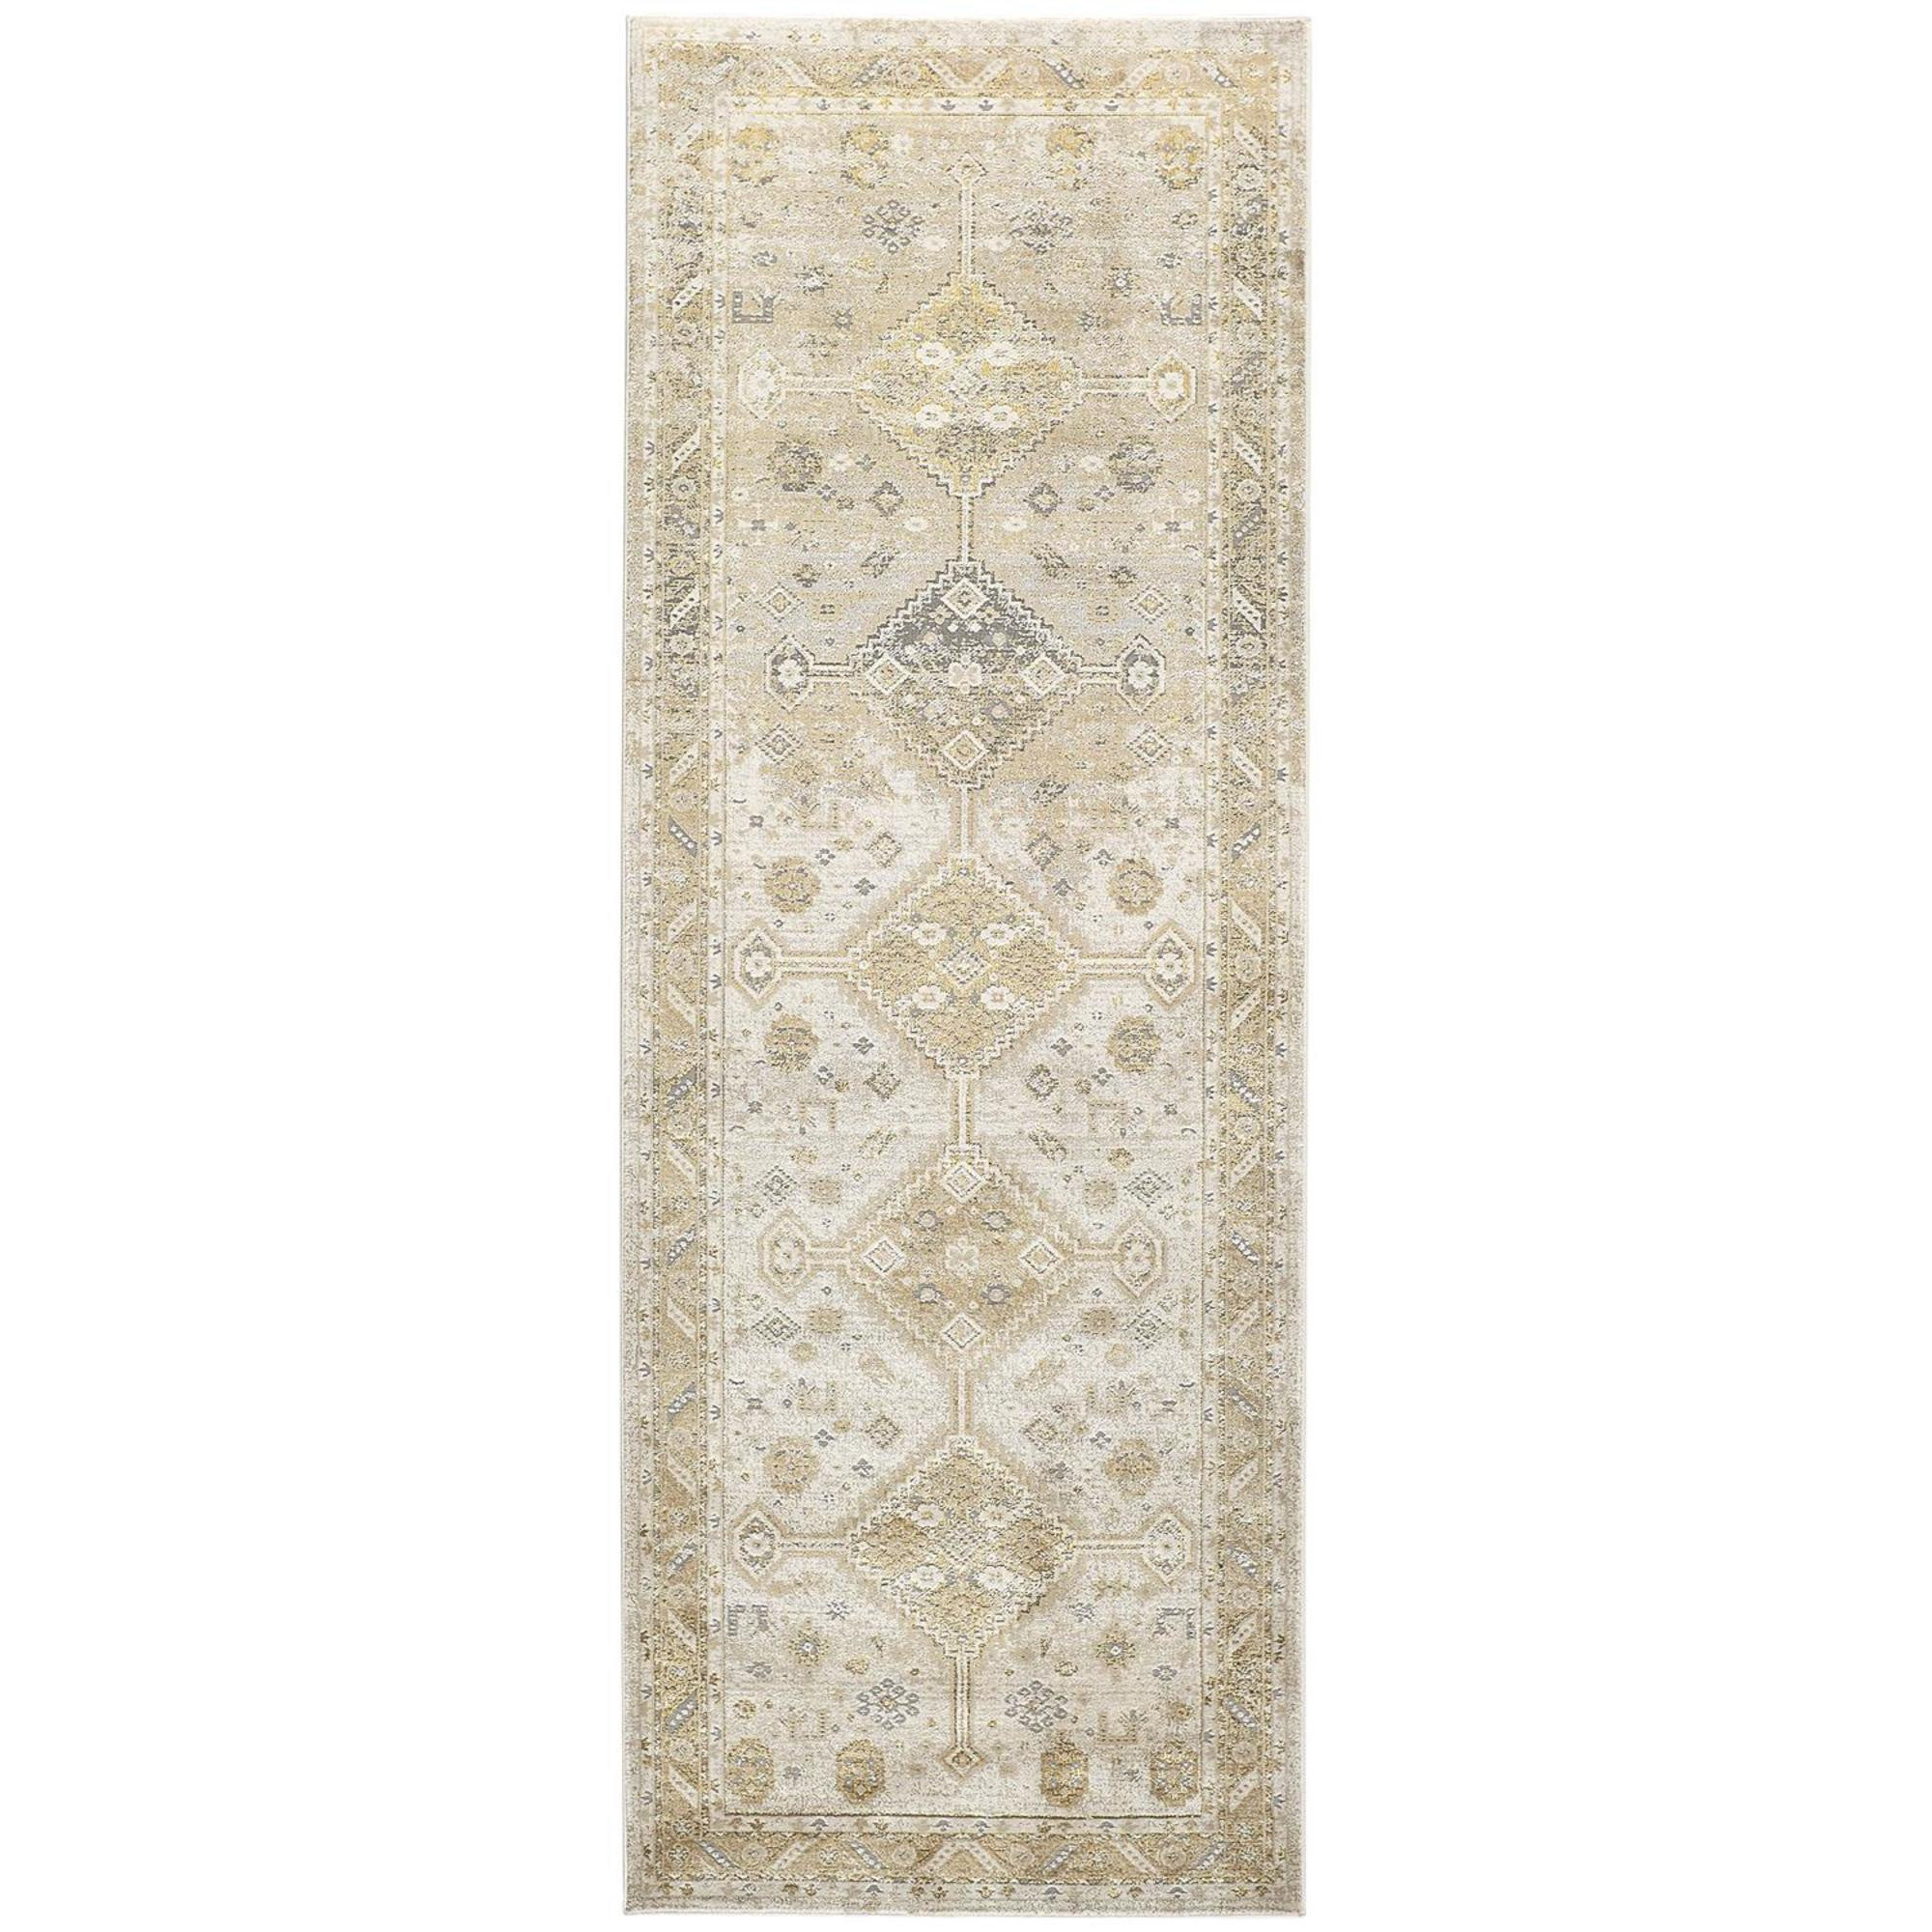 8' Gold and Ivory Floral Runner Rug-512984-1